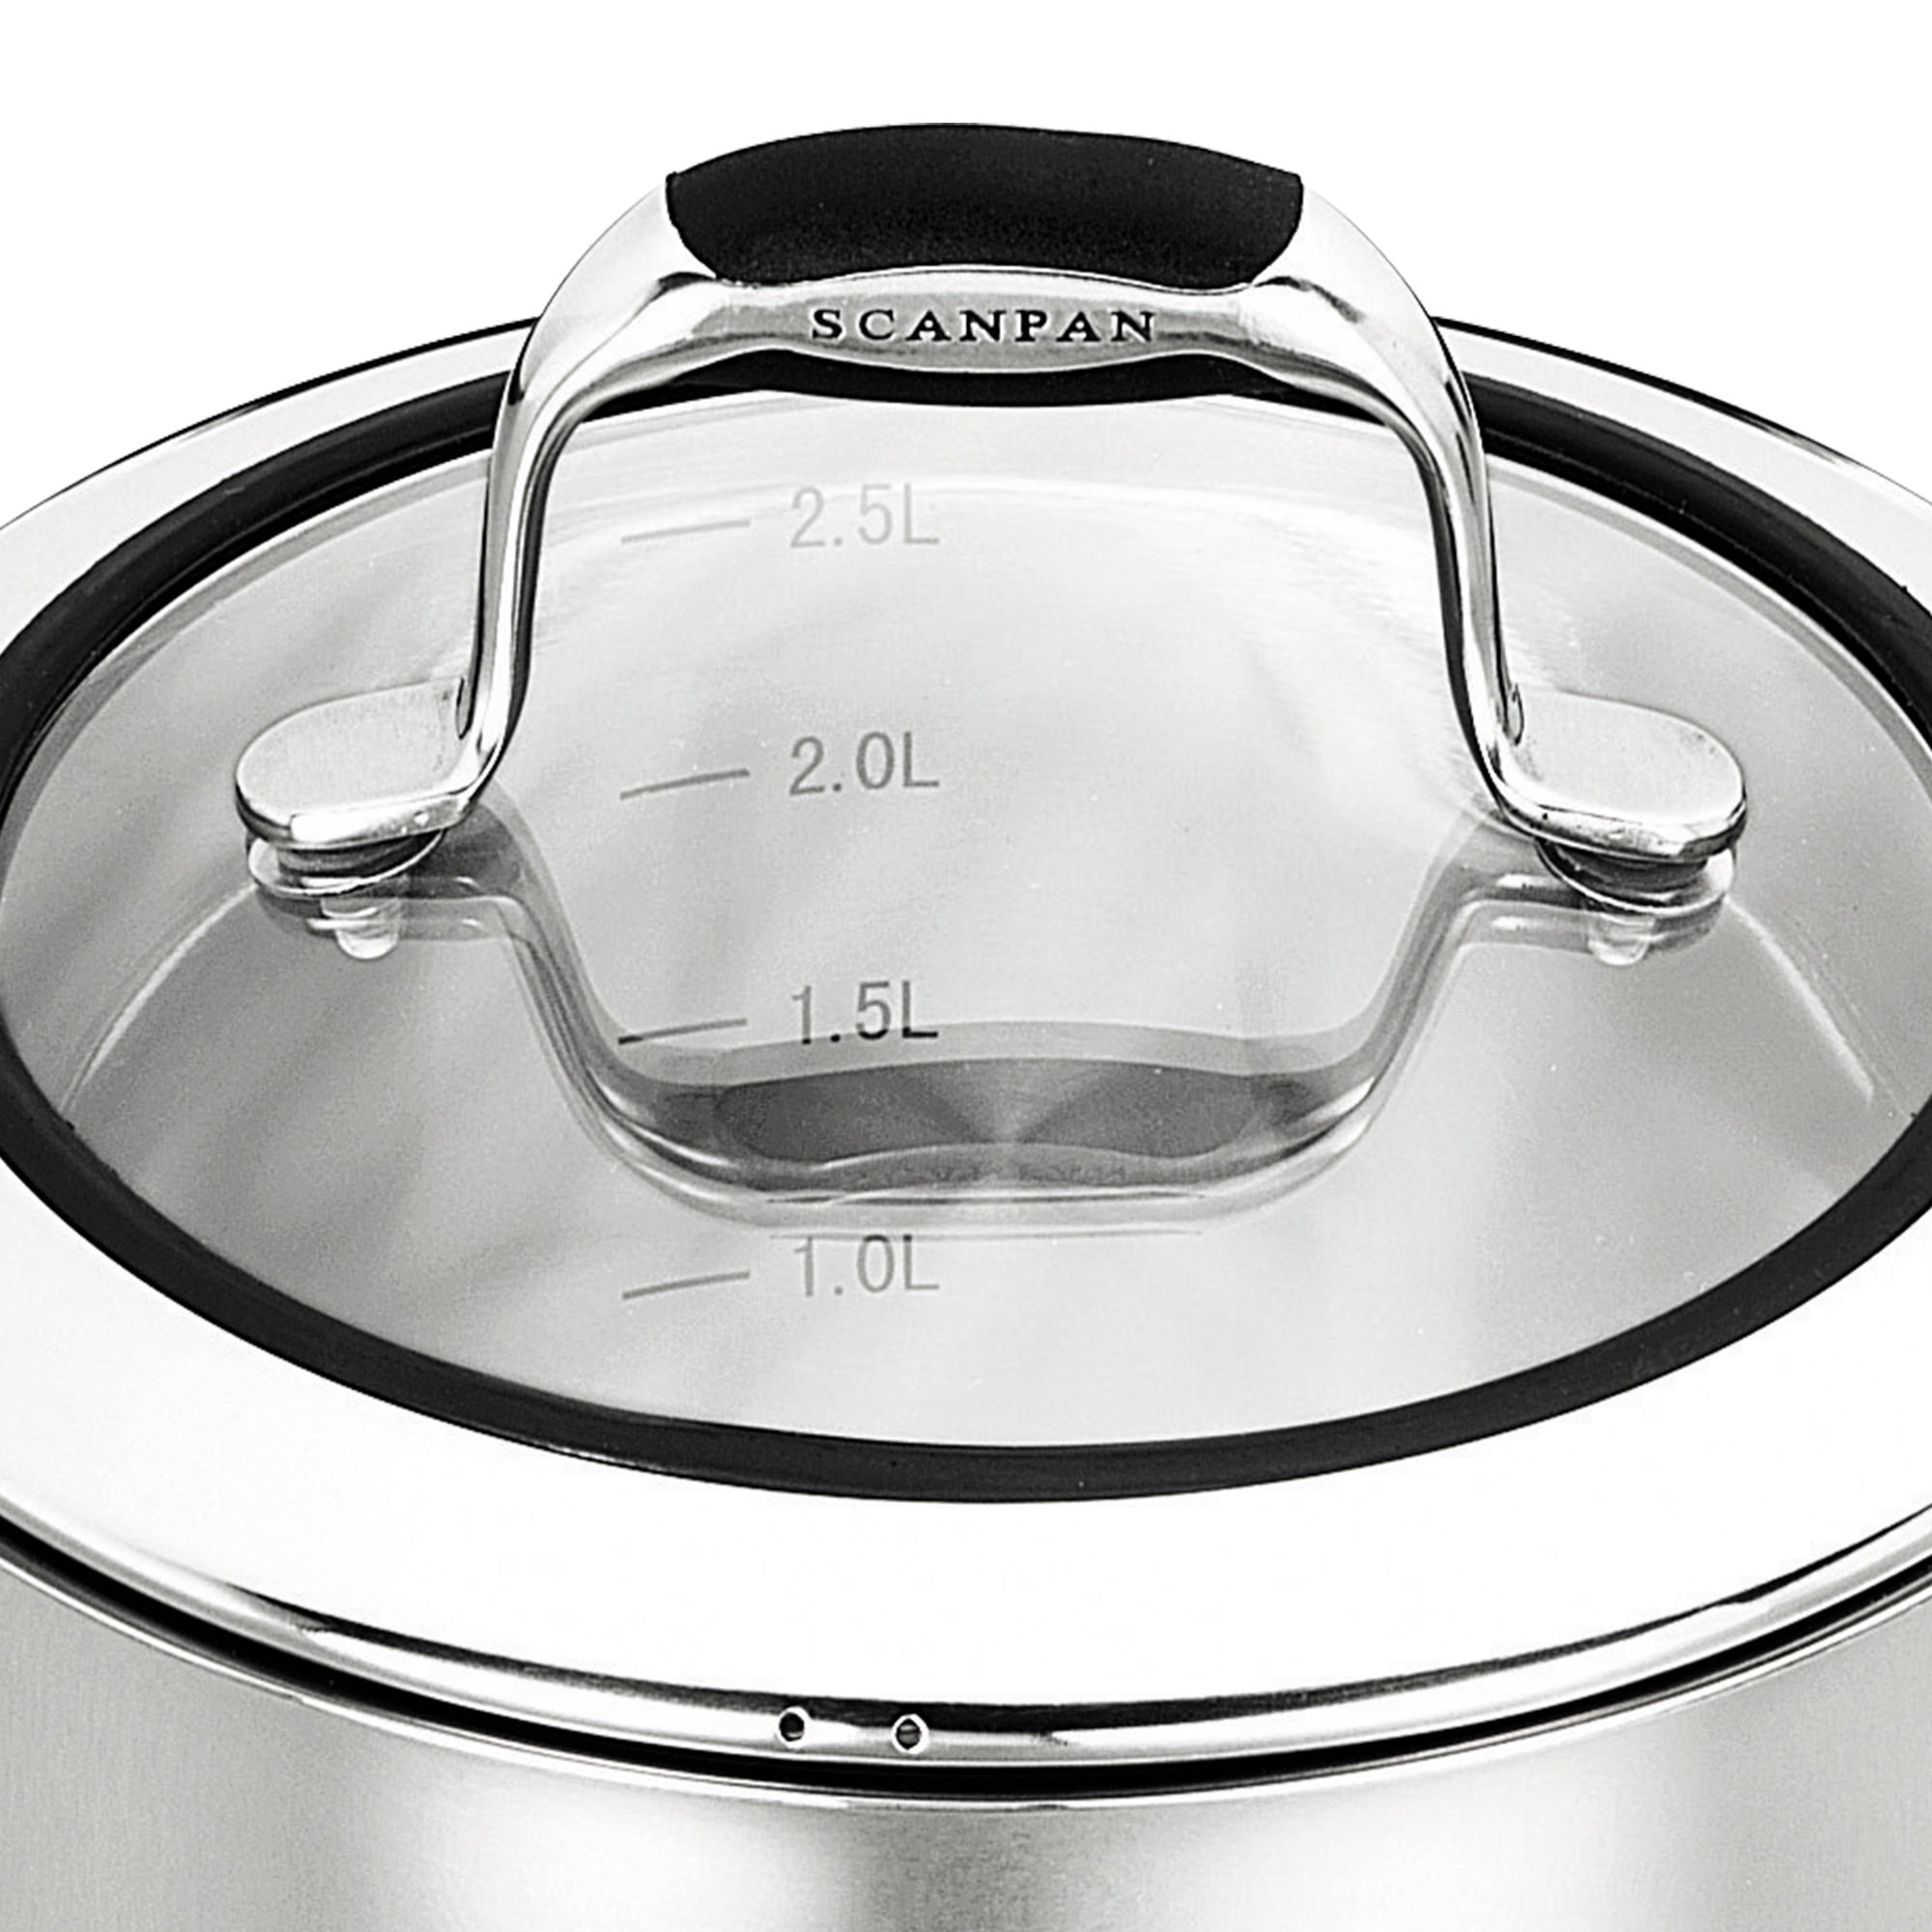 Scanpan Coppernox Stainless Steel Covered Saucepan 18cm - 2.5L Image 2